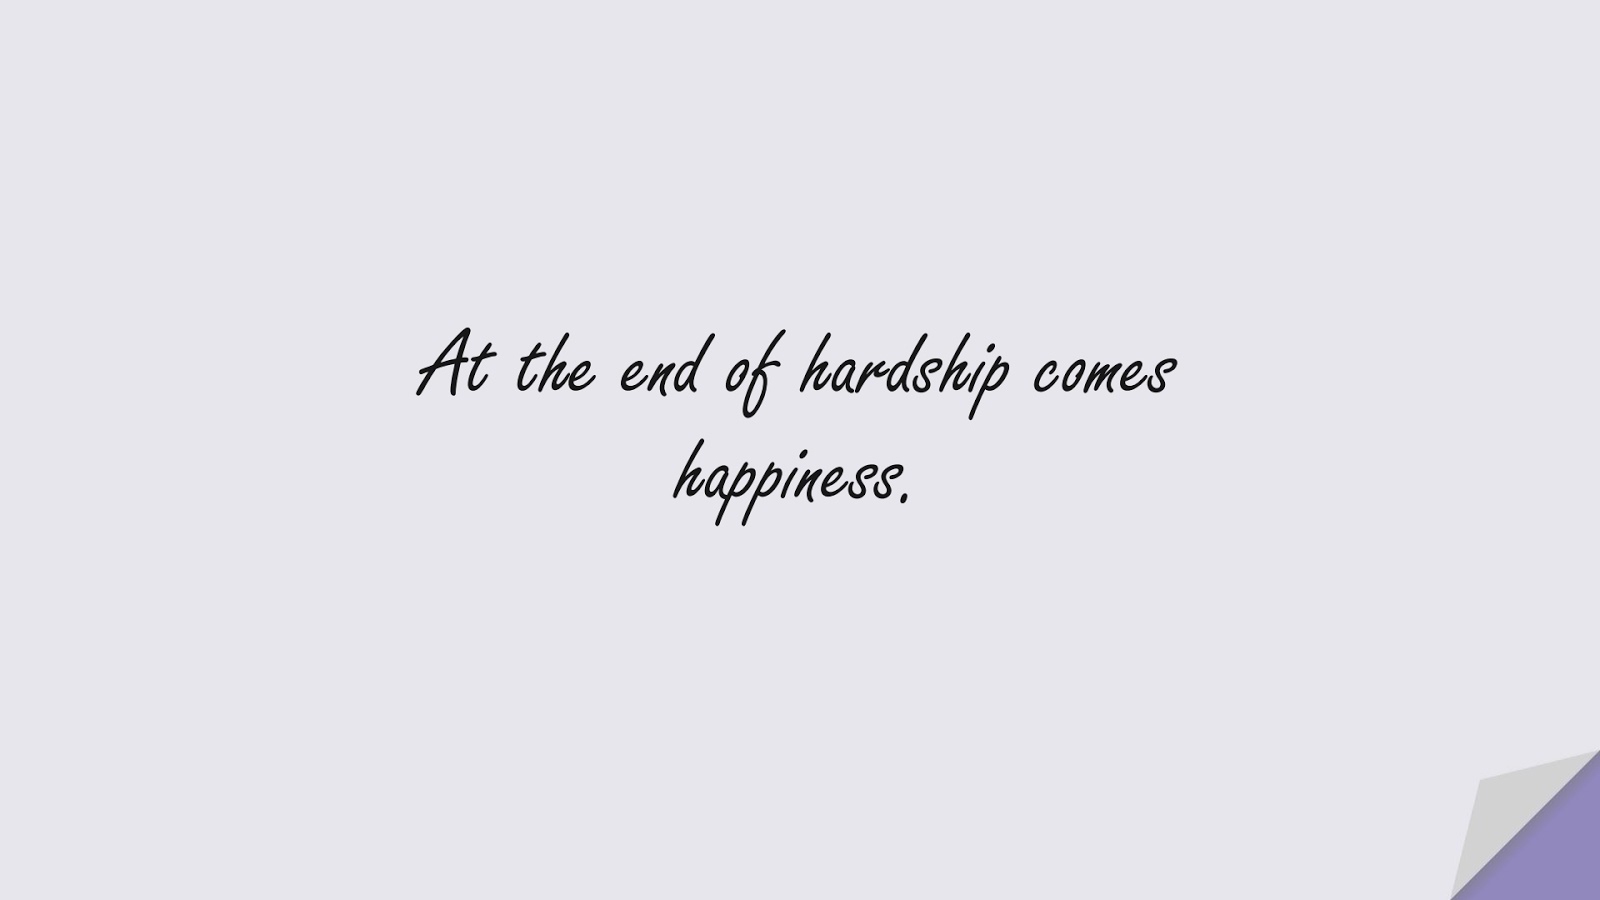 At the end of hardship comes happiness.FALSE